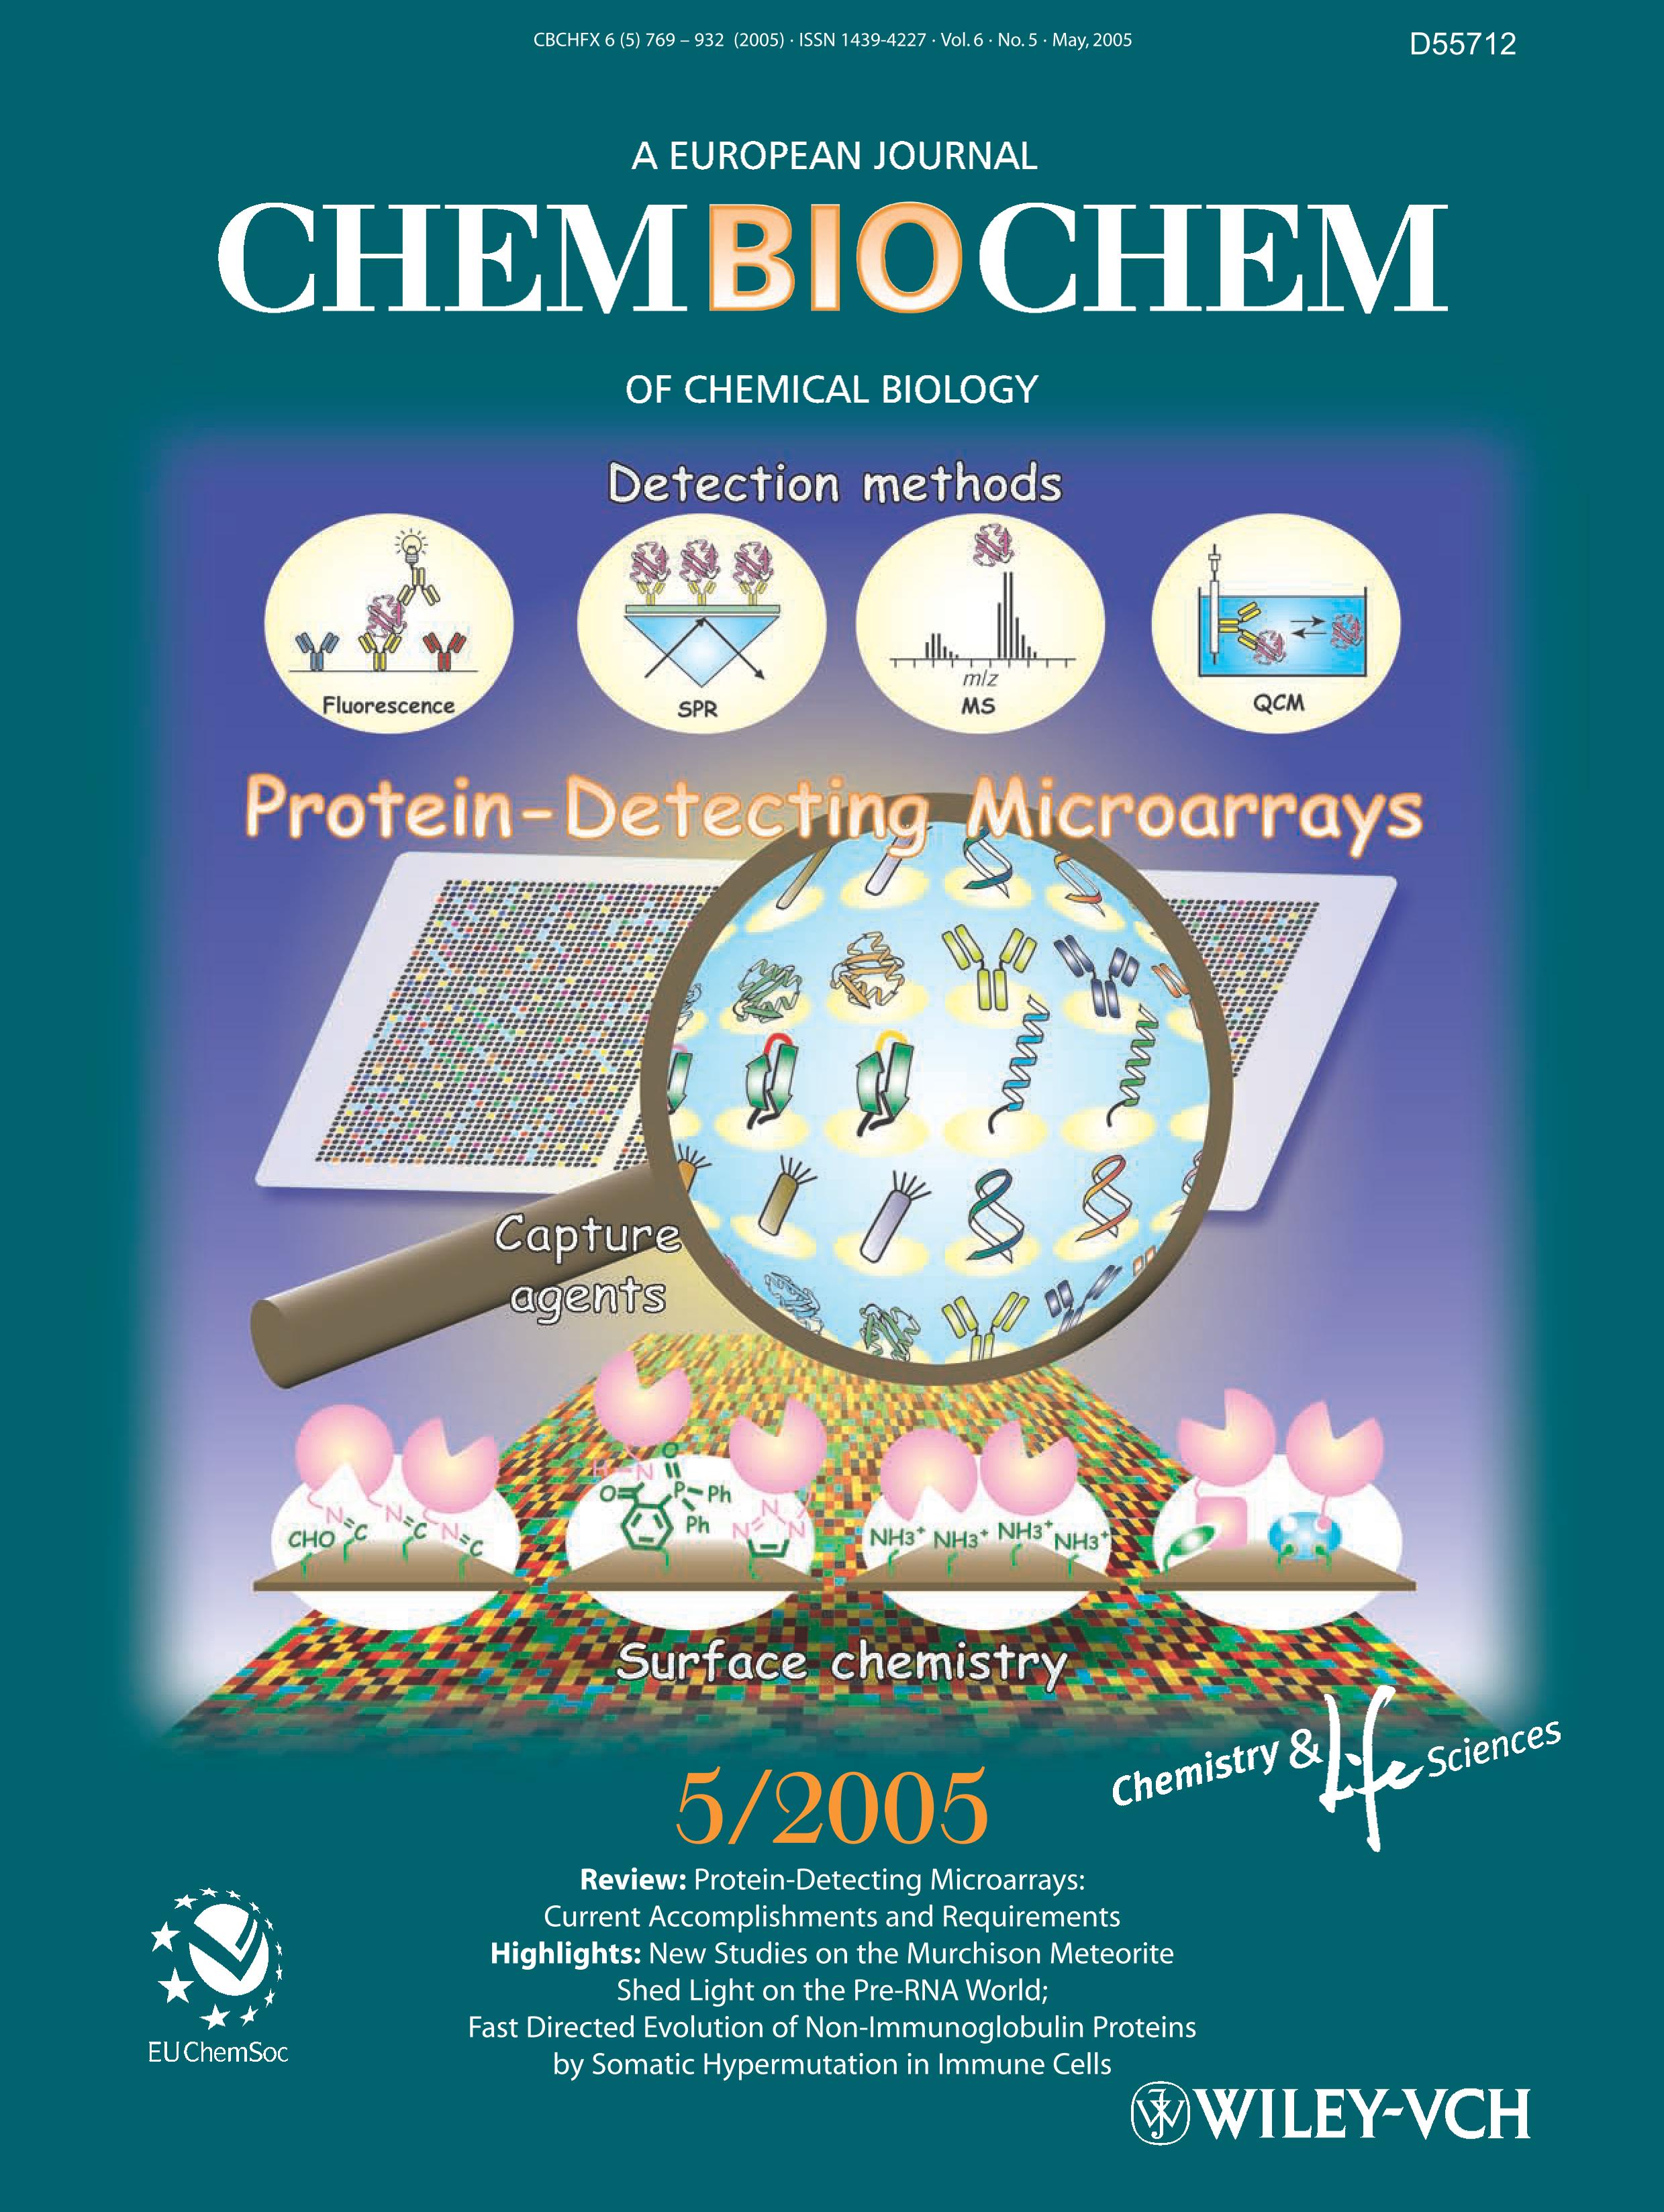 Protein-Detecting Microarrays: Current Accomplishments and Requirements